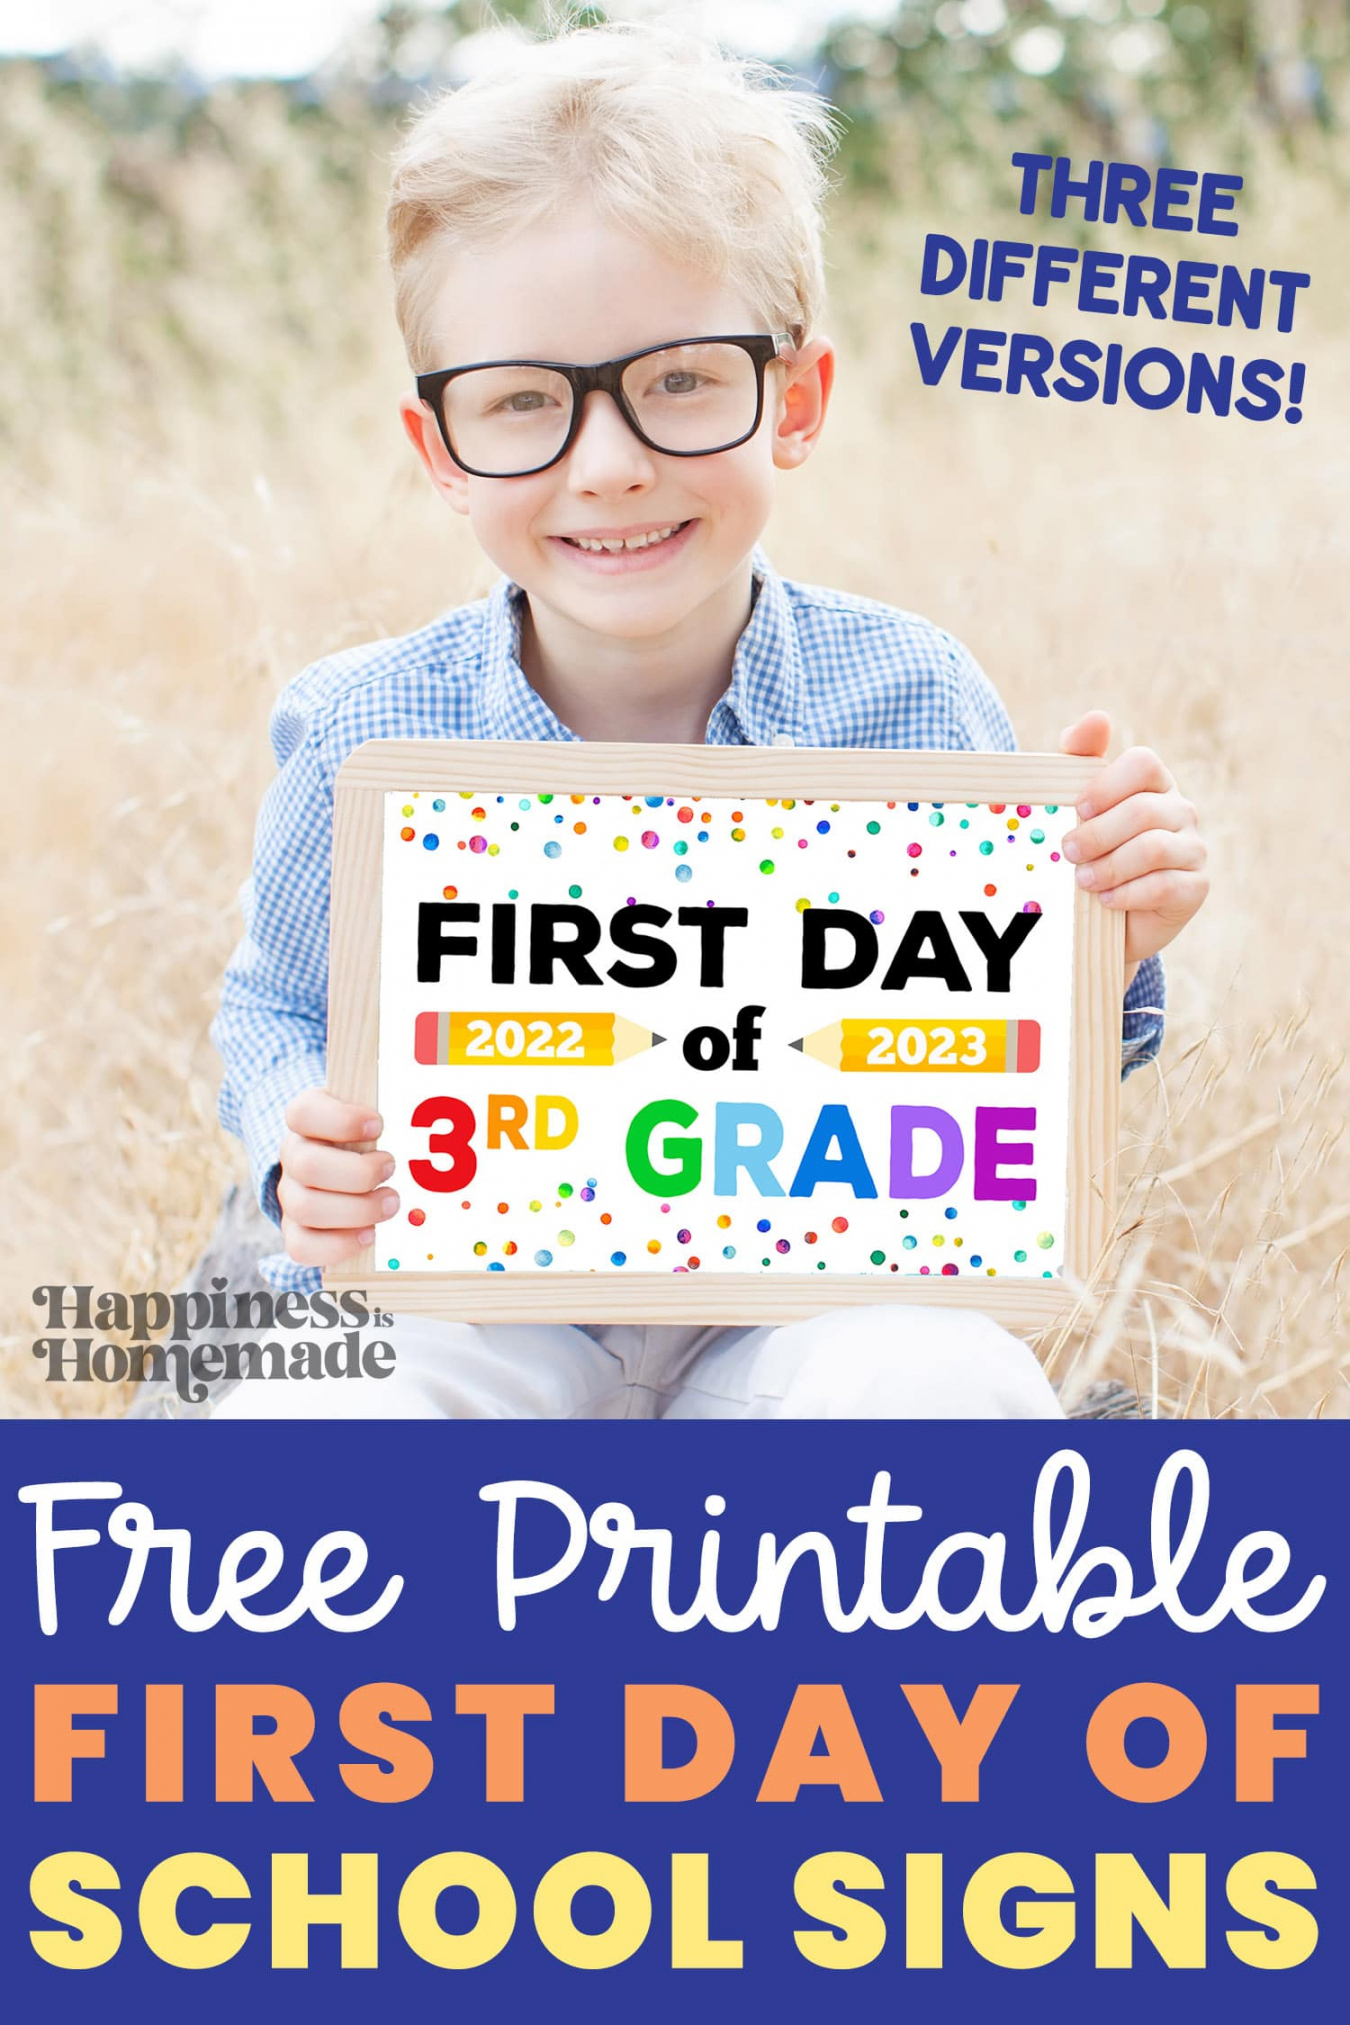 Free First Day of School Printables - Printable - Free Printable First Day of School Signs - - Happiness is